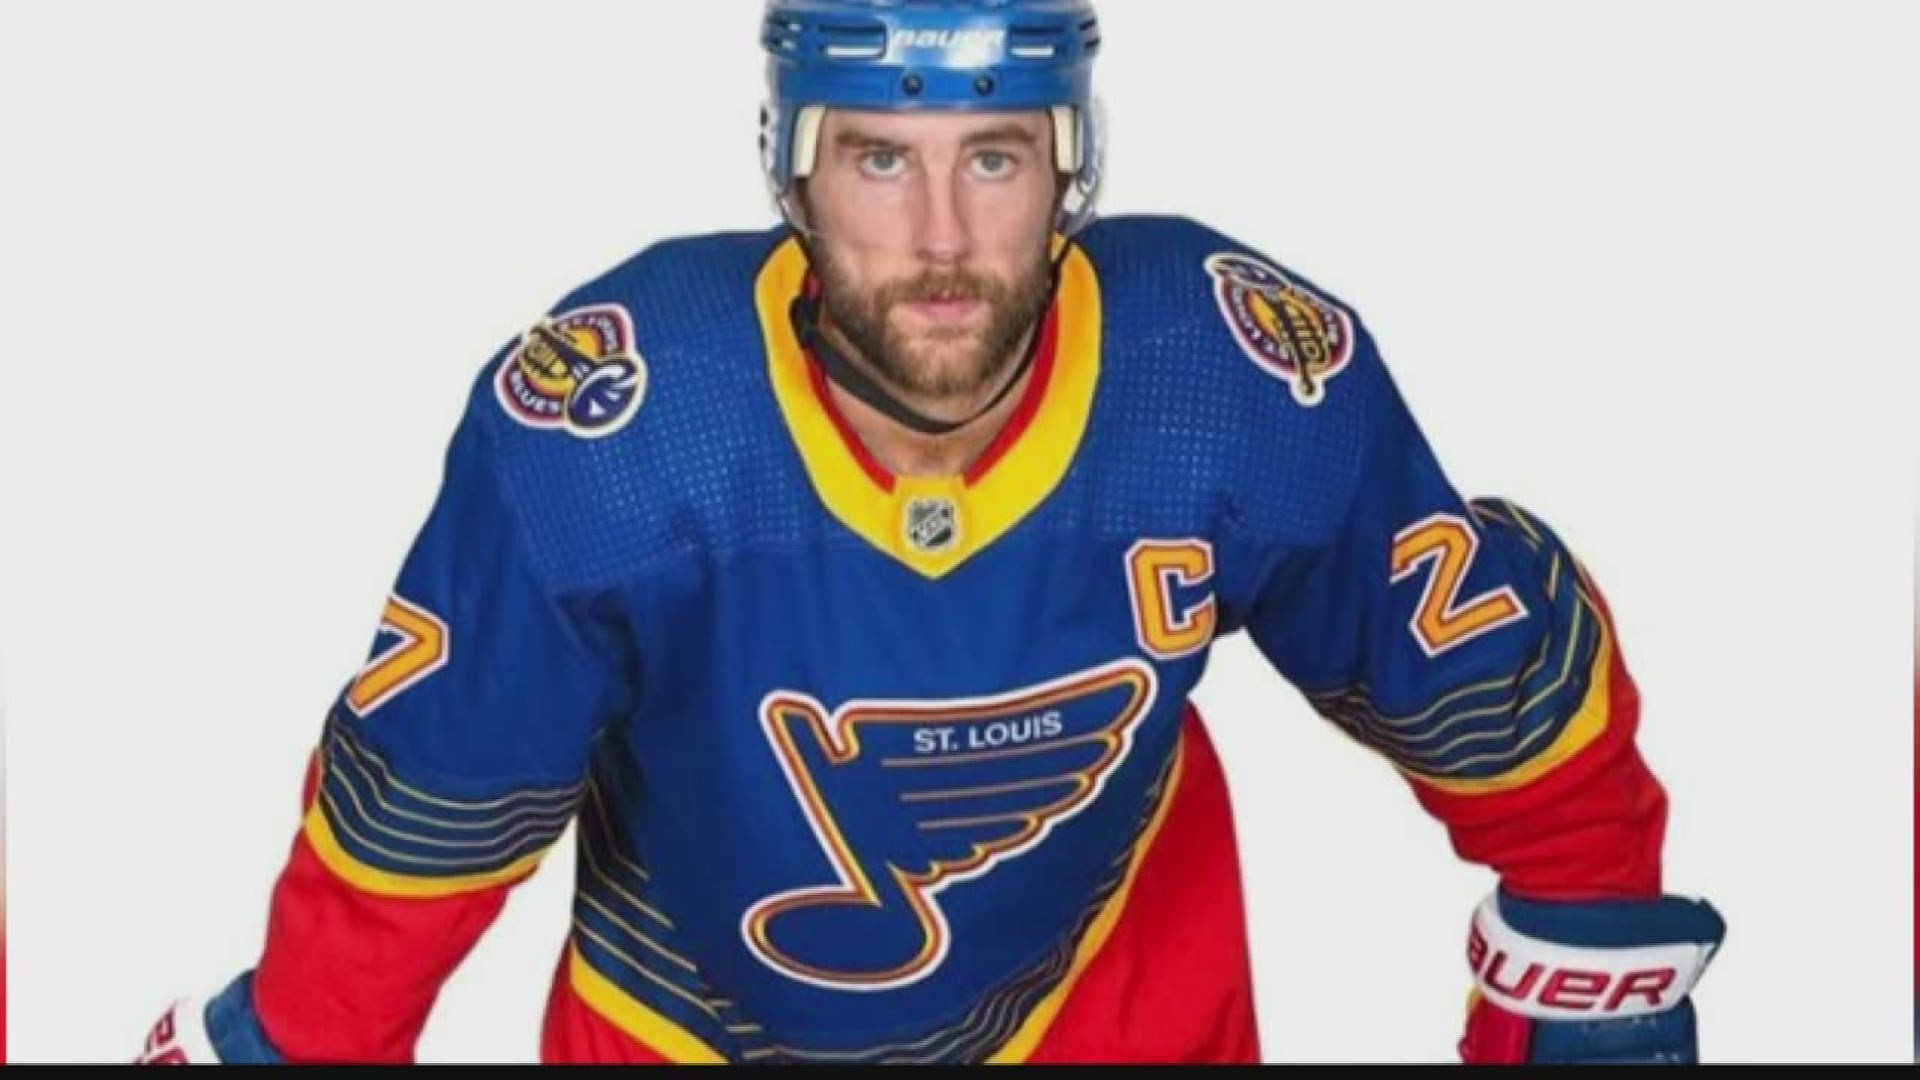 It's a blast from the past. The Blues revealed their 90s vintage jersey that they'll wearing for three home games this season.